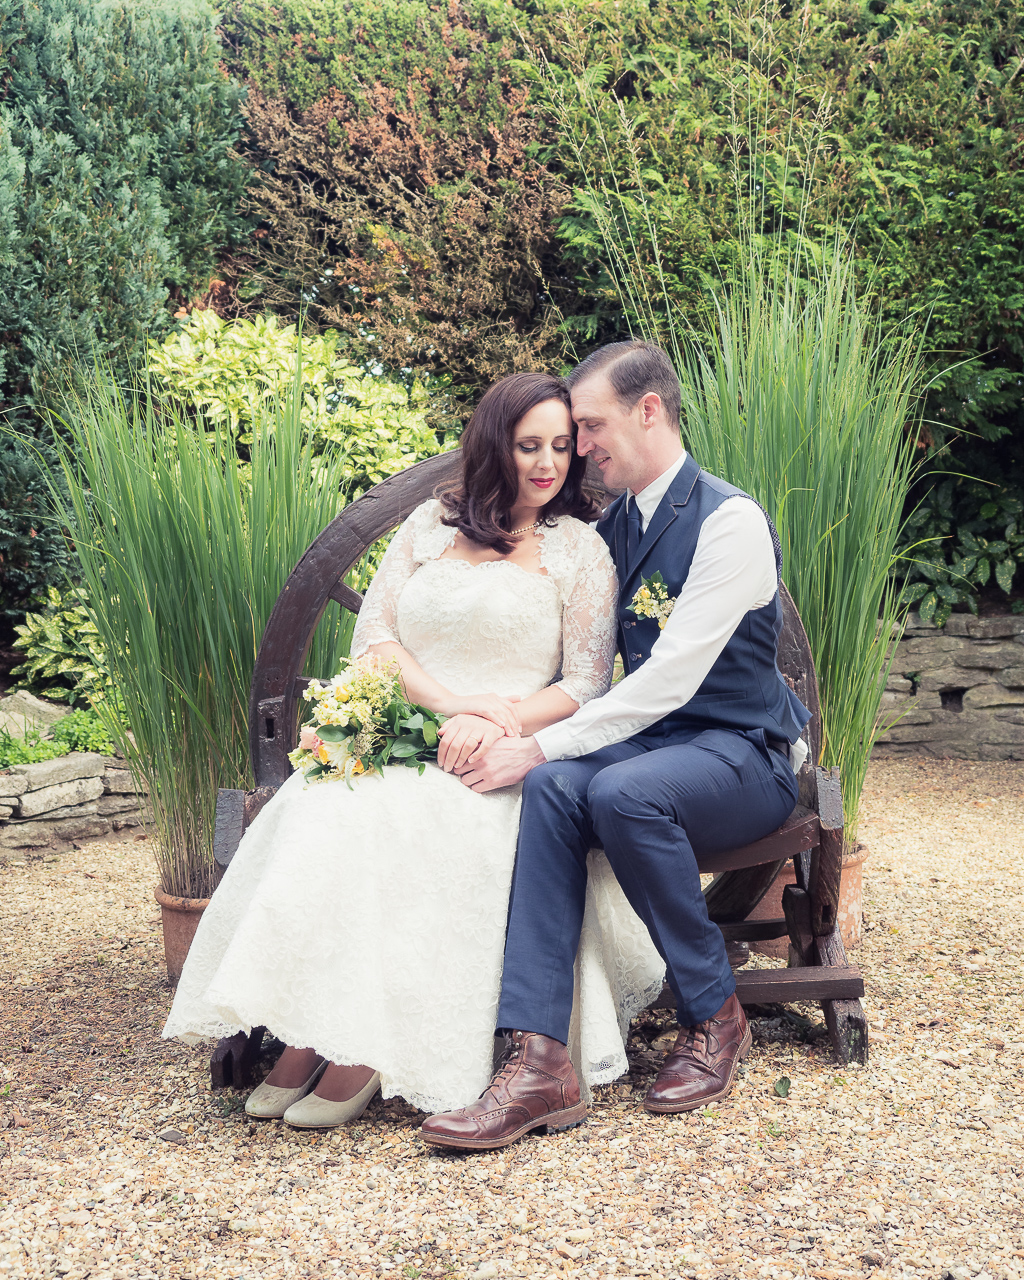 Traditional vintage styled wedding photoshoot at The Orangery Suite, photographer credit Dom Brenton Photography (29)